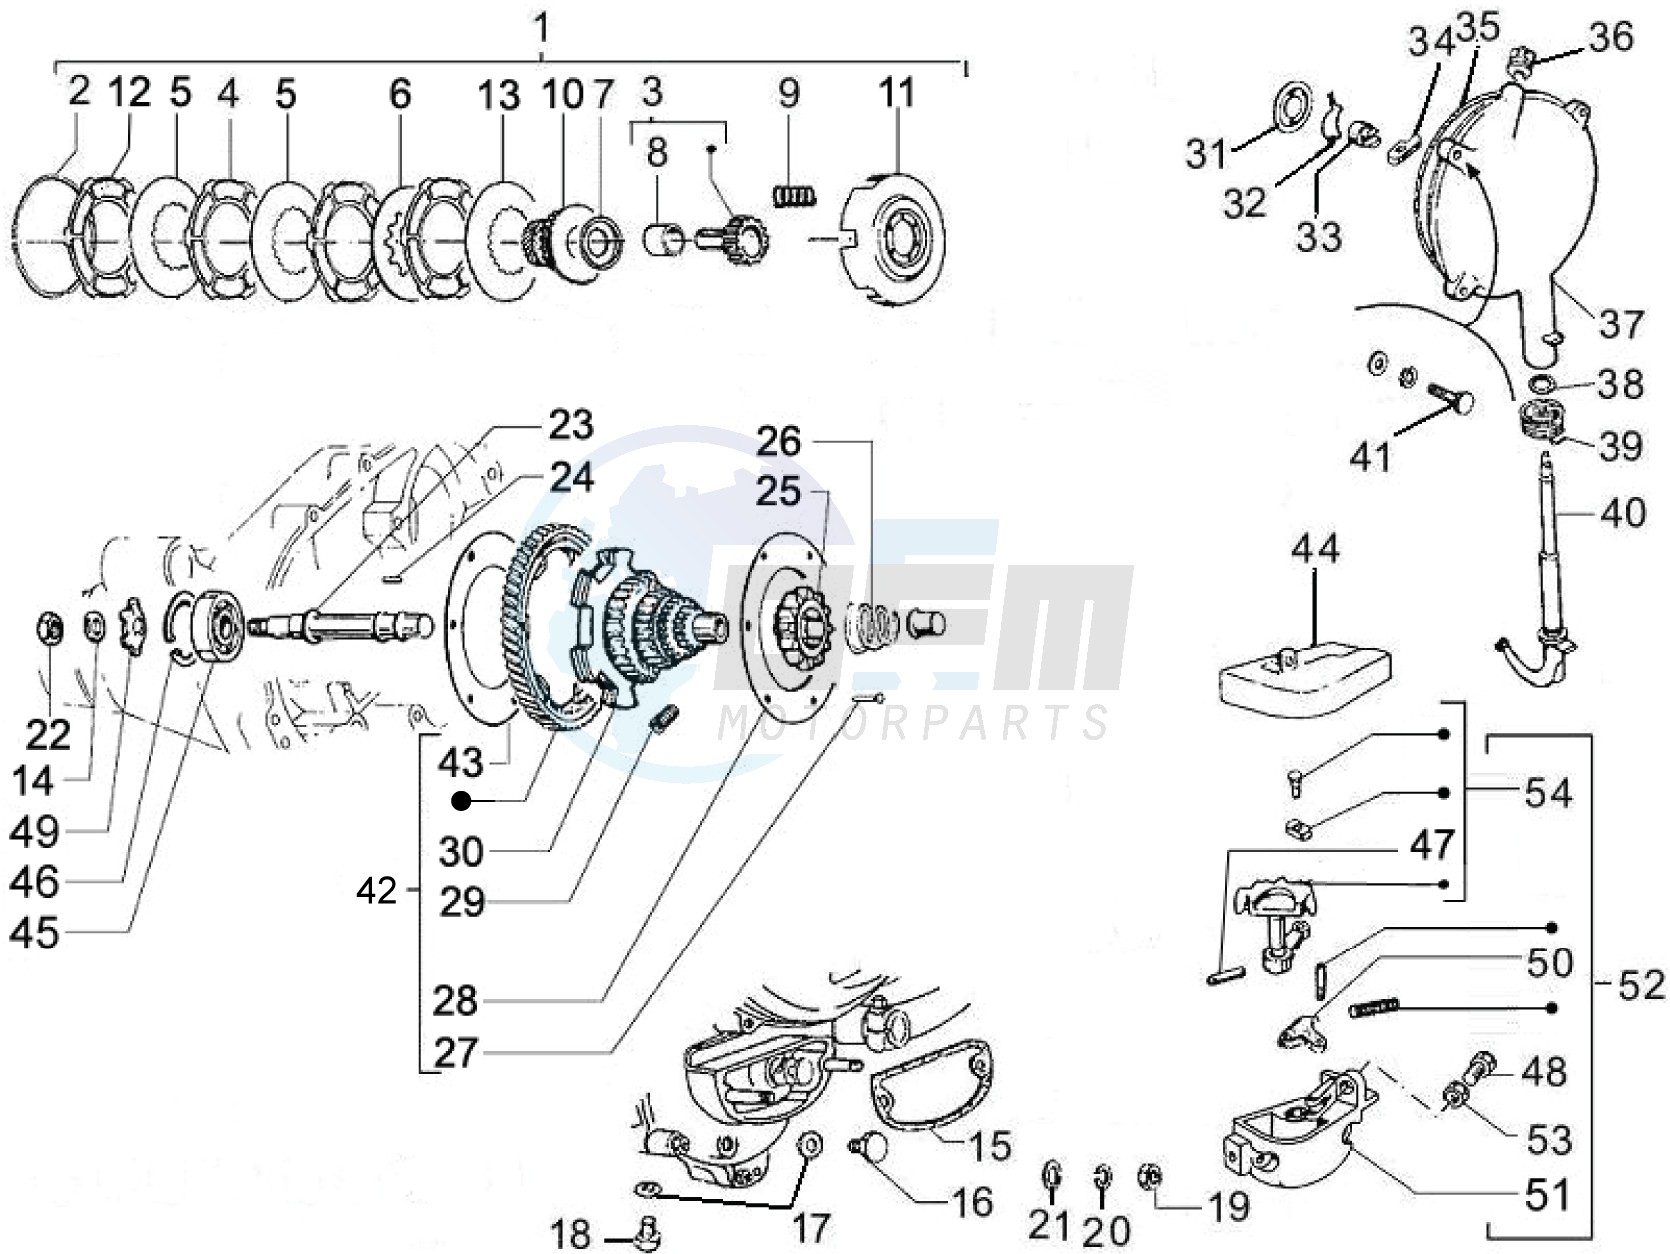 Gear-box components image